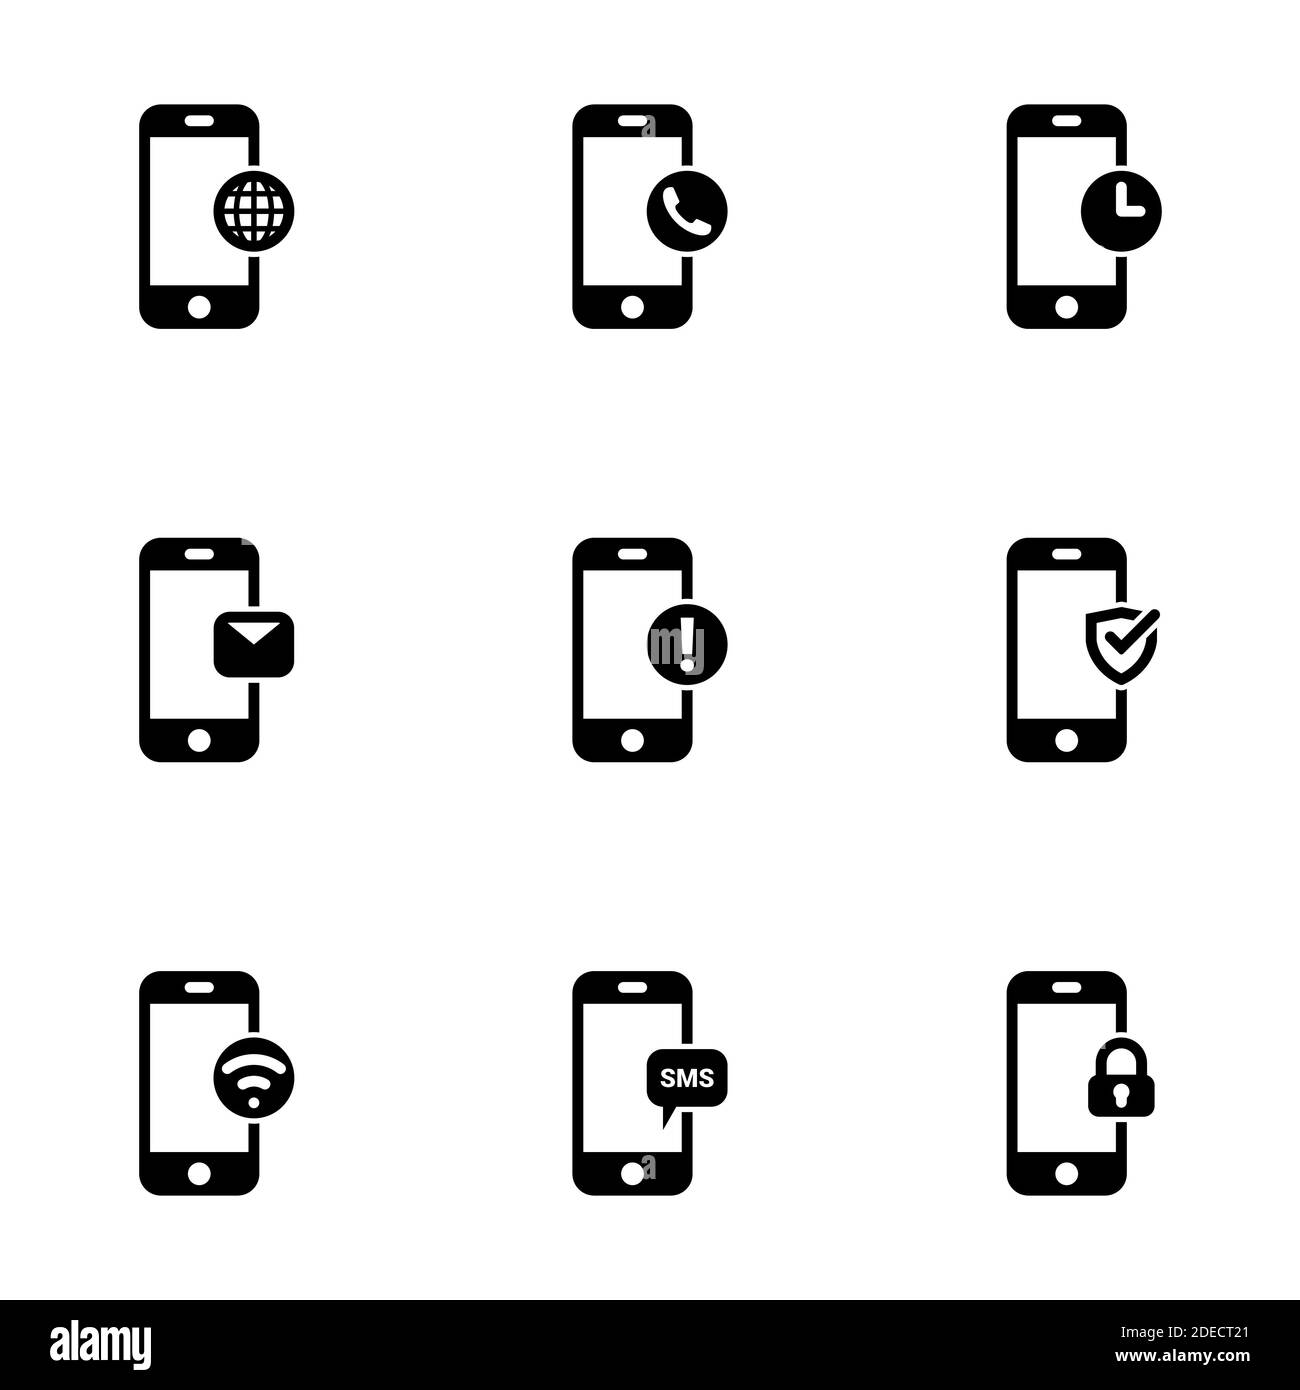 Set of simple icons on a theme Phone functions, functionality, notification, communication, internet, message, vector, set. White background Stock Vector